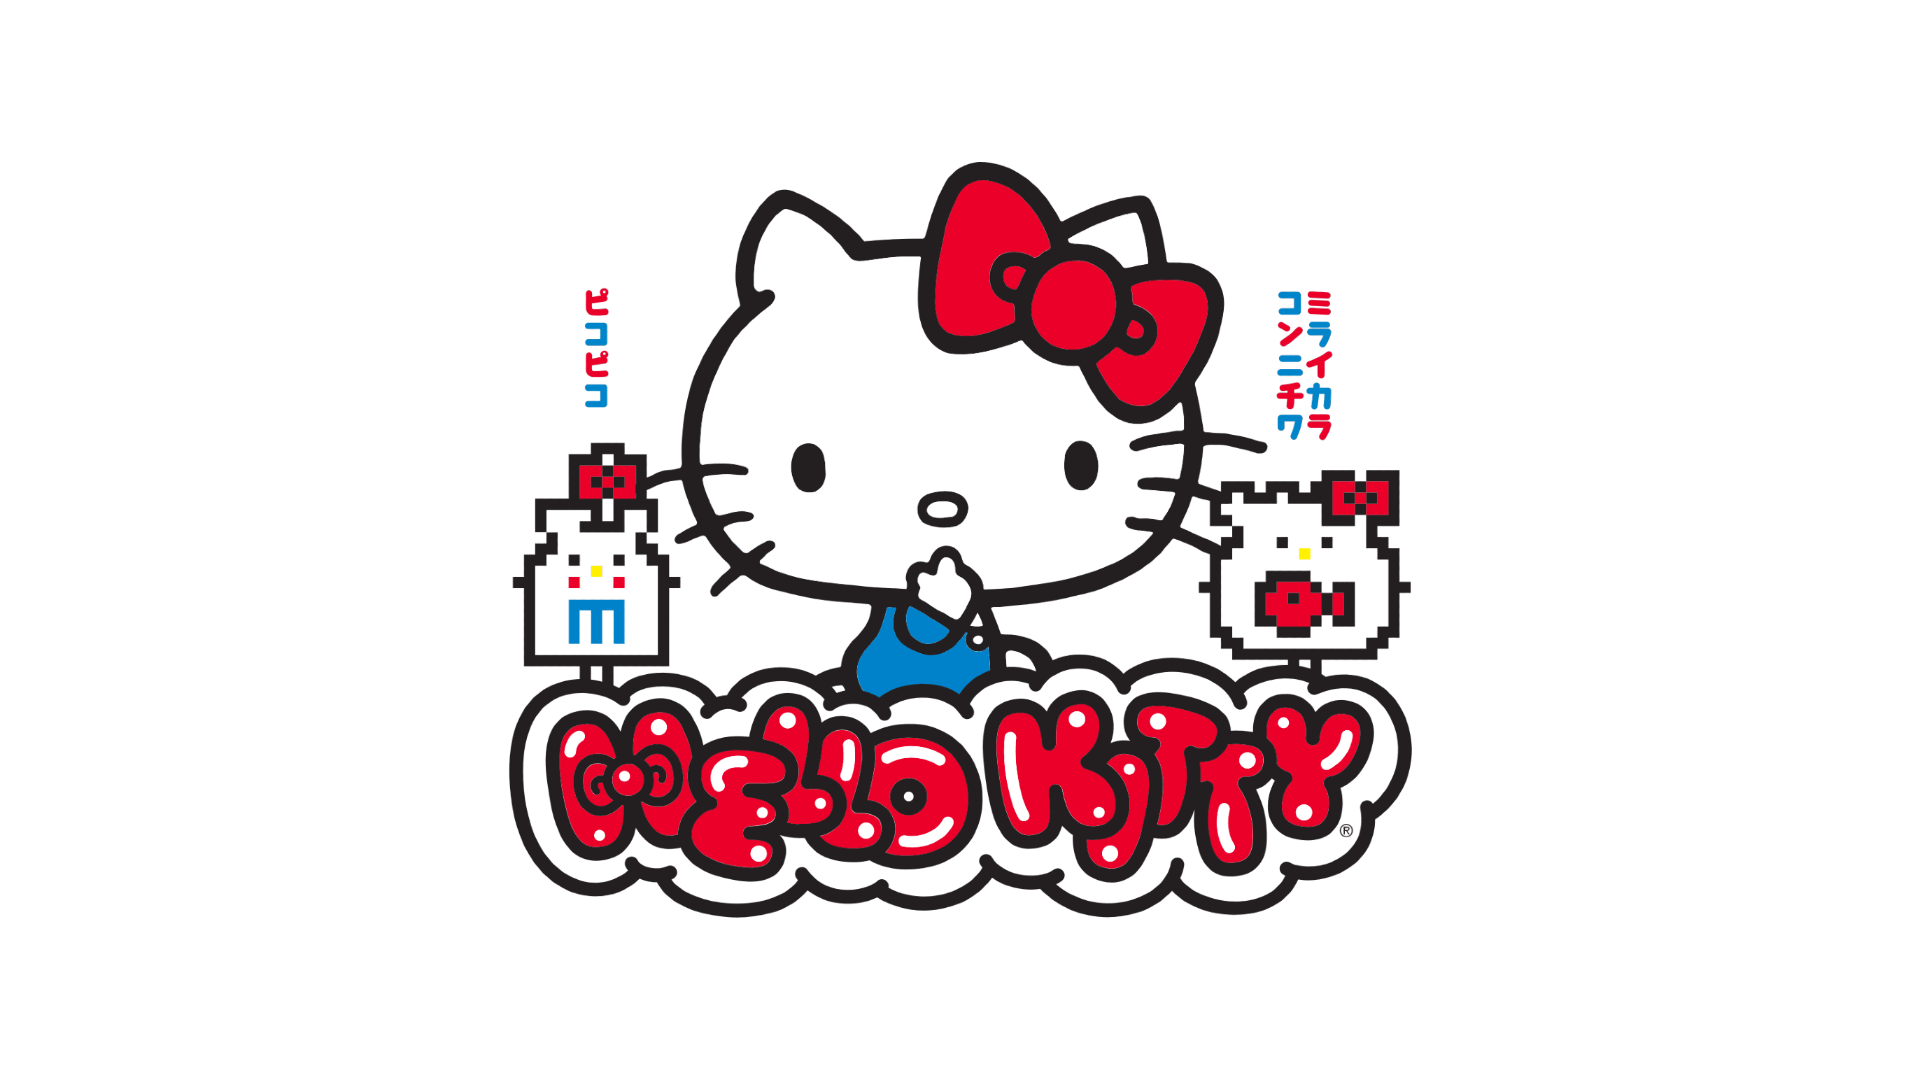 First Hello Kitty Cafe in U.S. is the cat's meow to fans